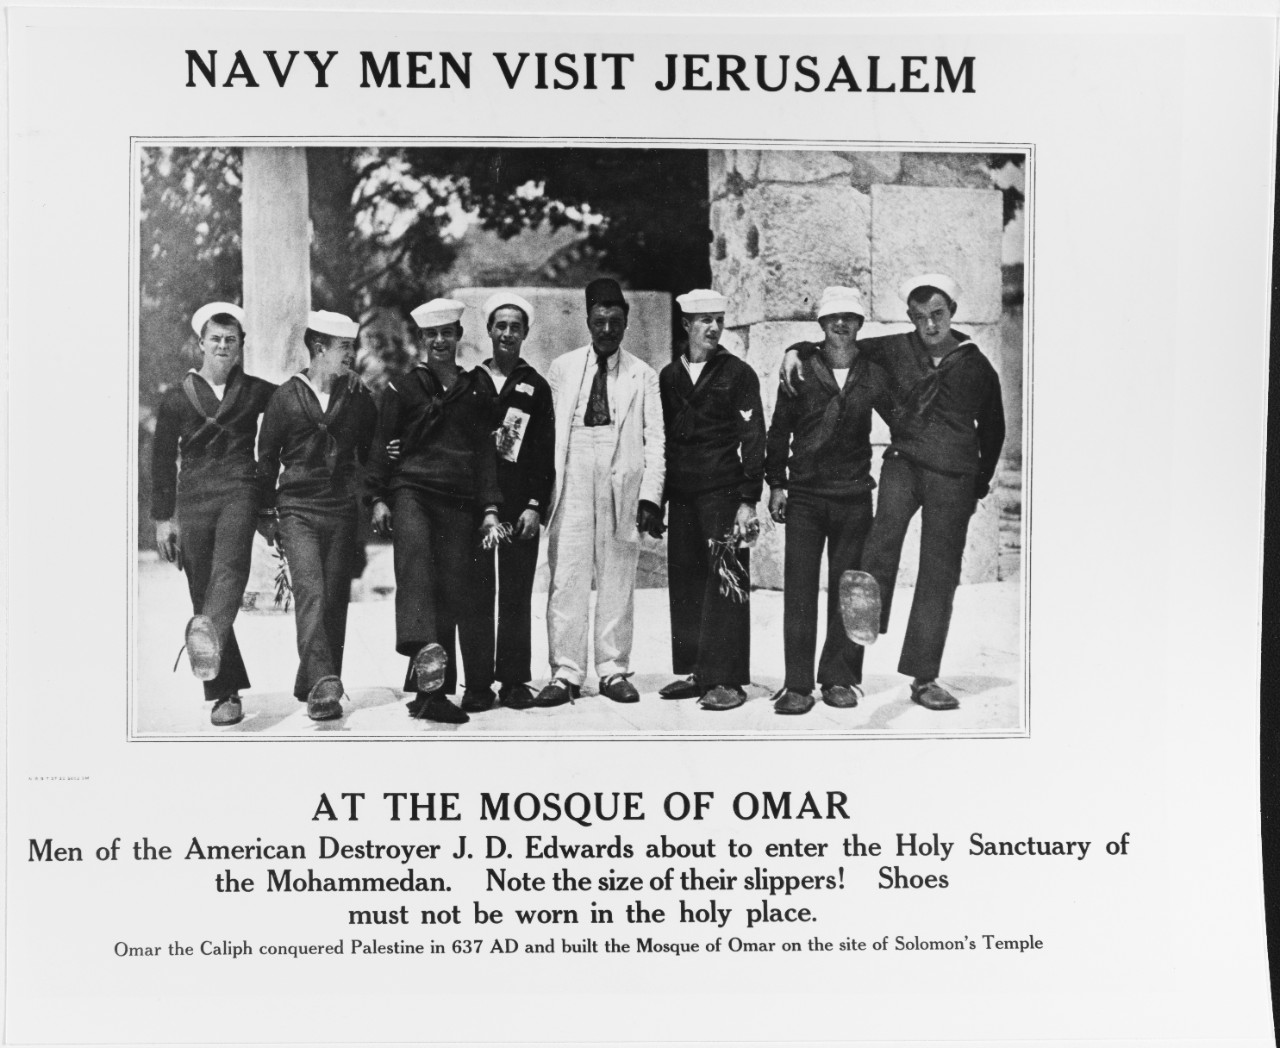 Recruiting Poster: Navy men Visit Jerusalem at the Mosque of Omar